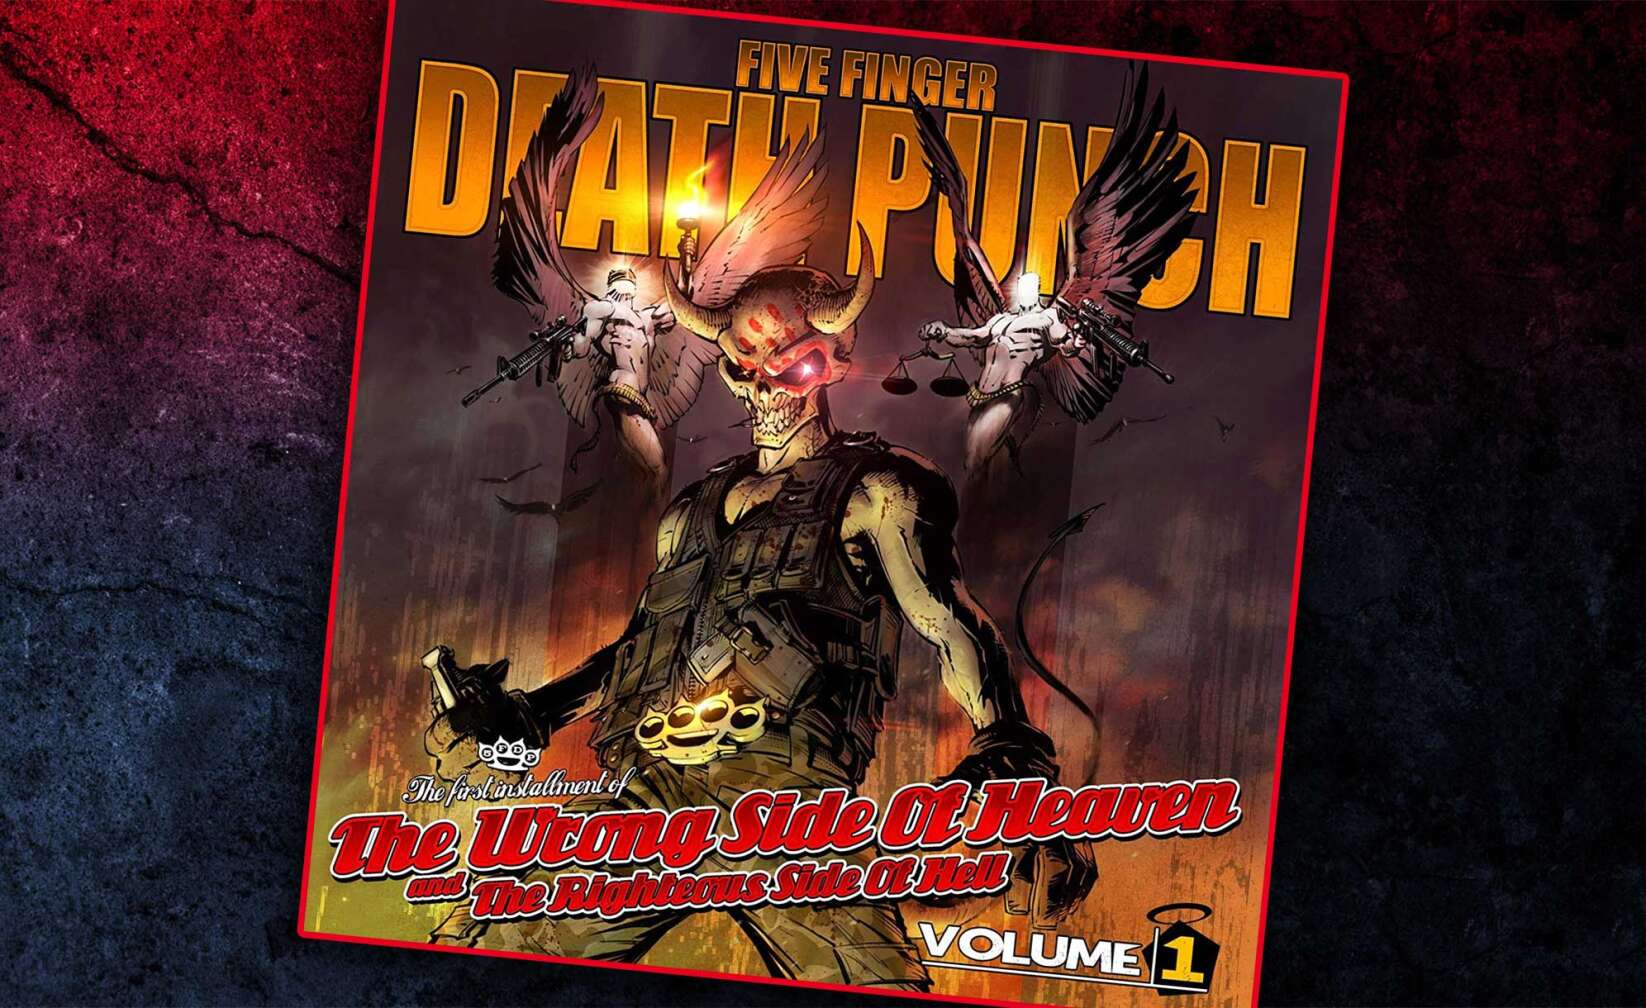 Albumcover von Five Finger Death Punch - 'The Wrong Side of Heaven and the Righteous Side of Hell, Volume 1’